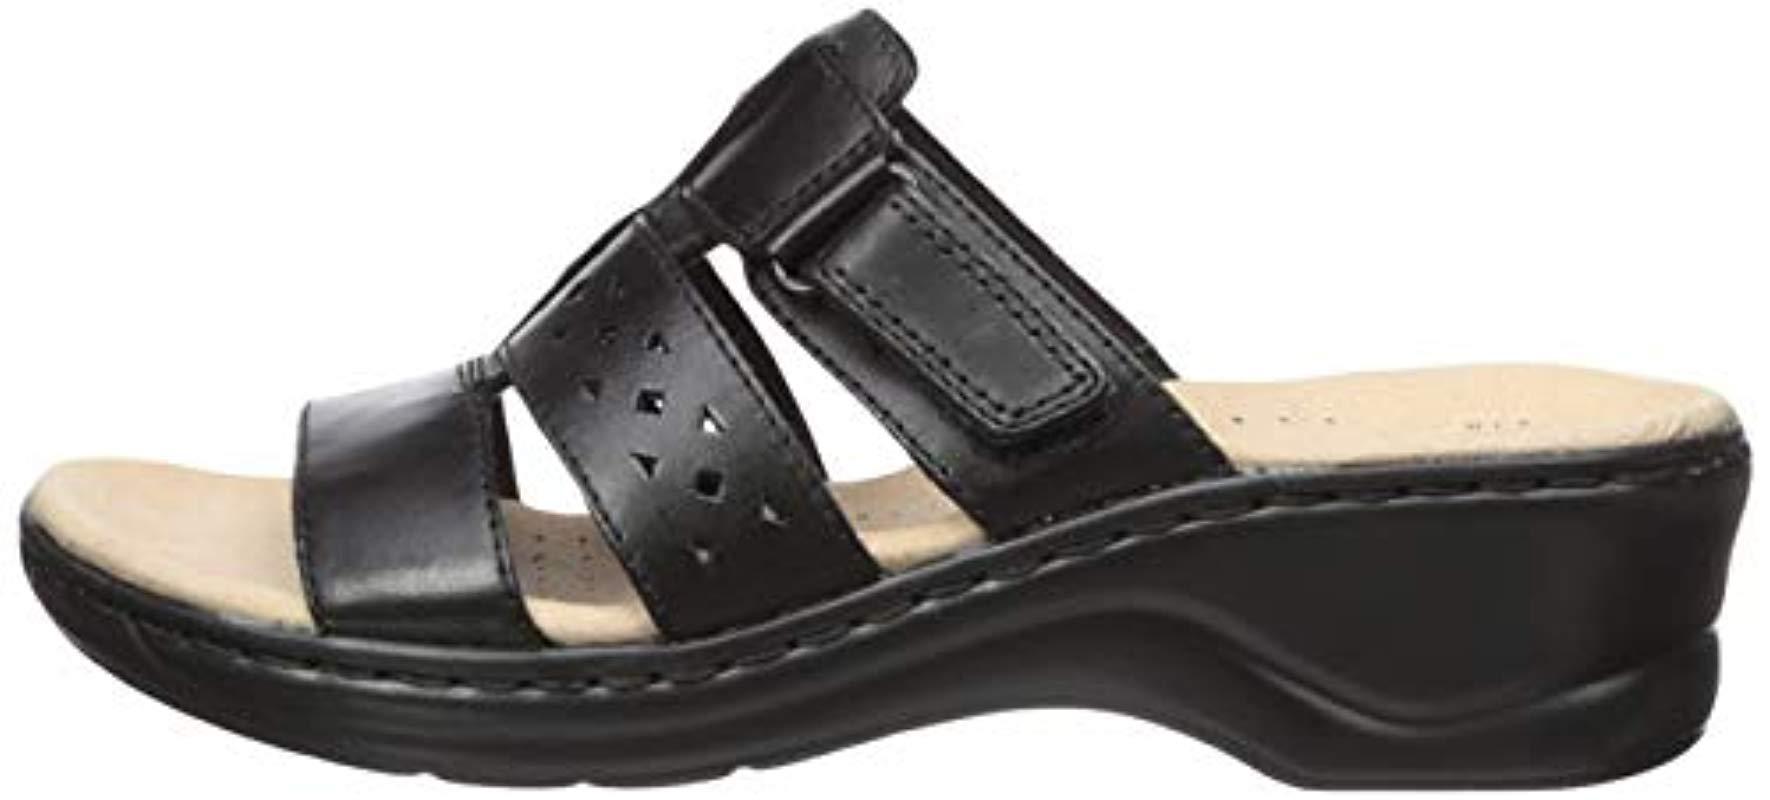 Clarks Leather Lexi Juno Sandal in 